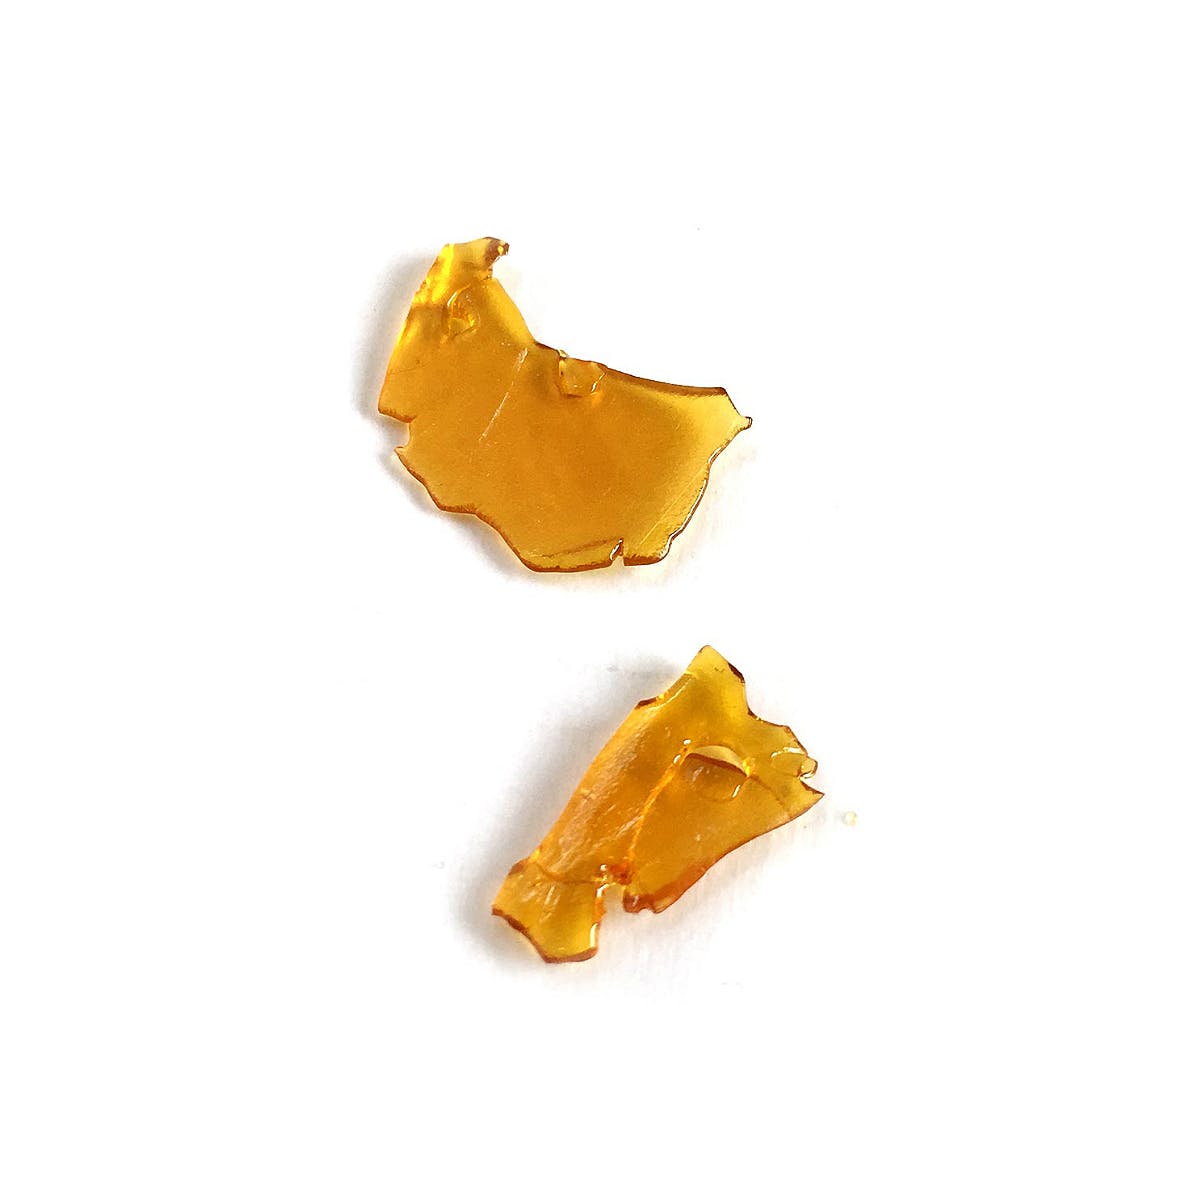 dutch treat **house shatter buy 2 grams get 1 free**